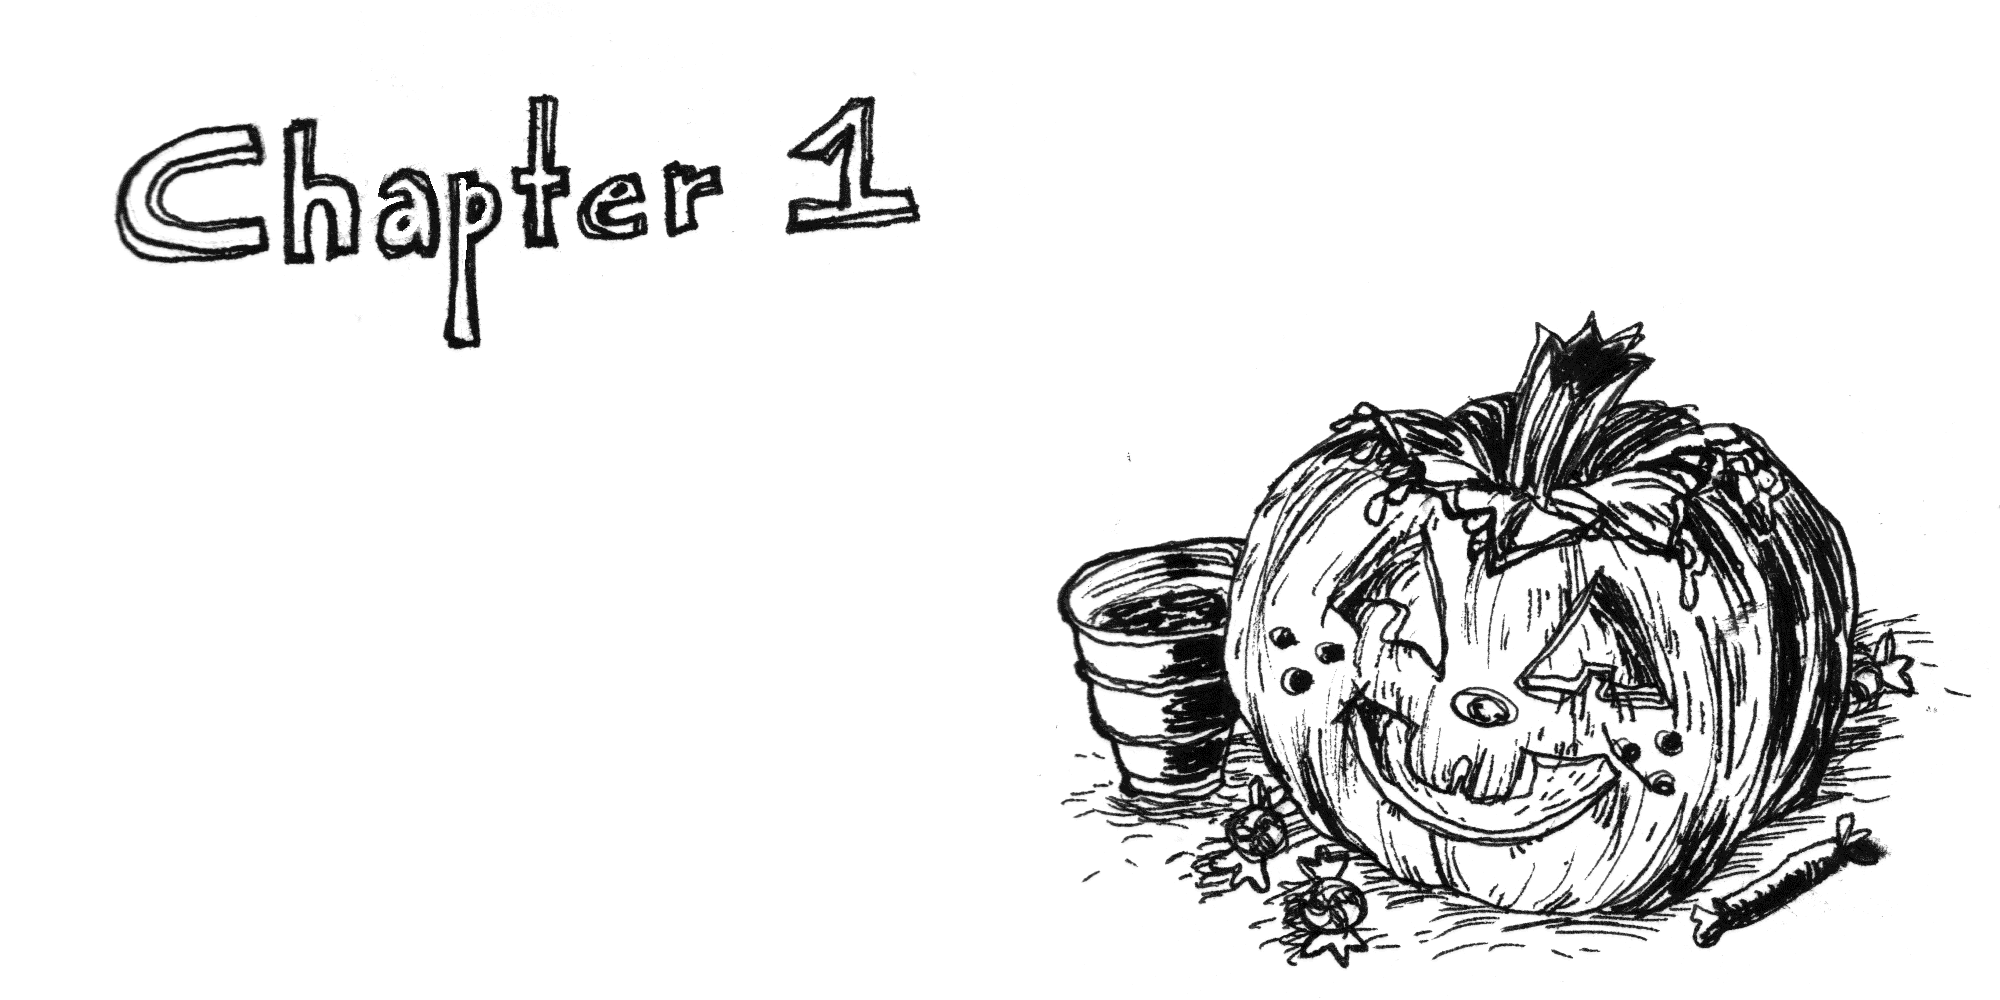 Chapter 1 - with
            an illustration of a carved pumpkin surrounded by candy and a red party cup for
            Halloween